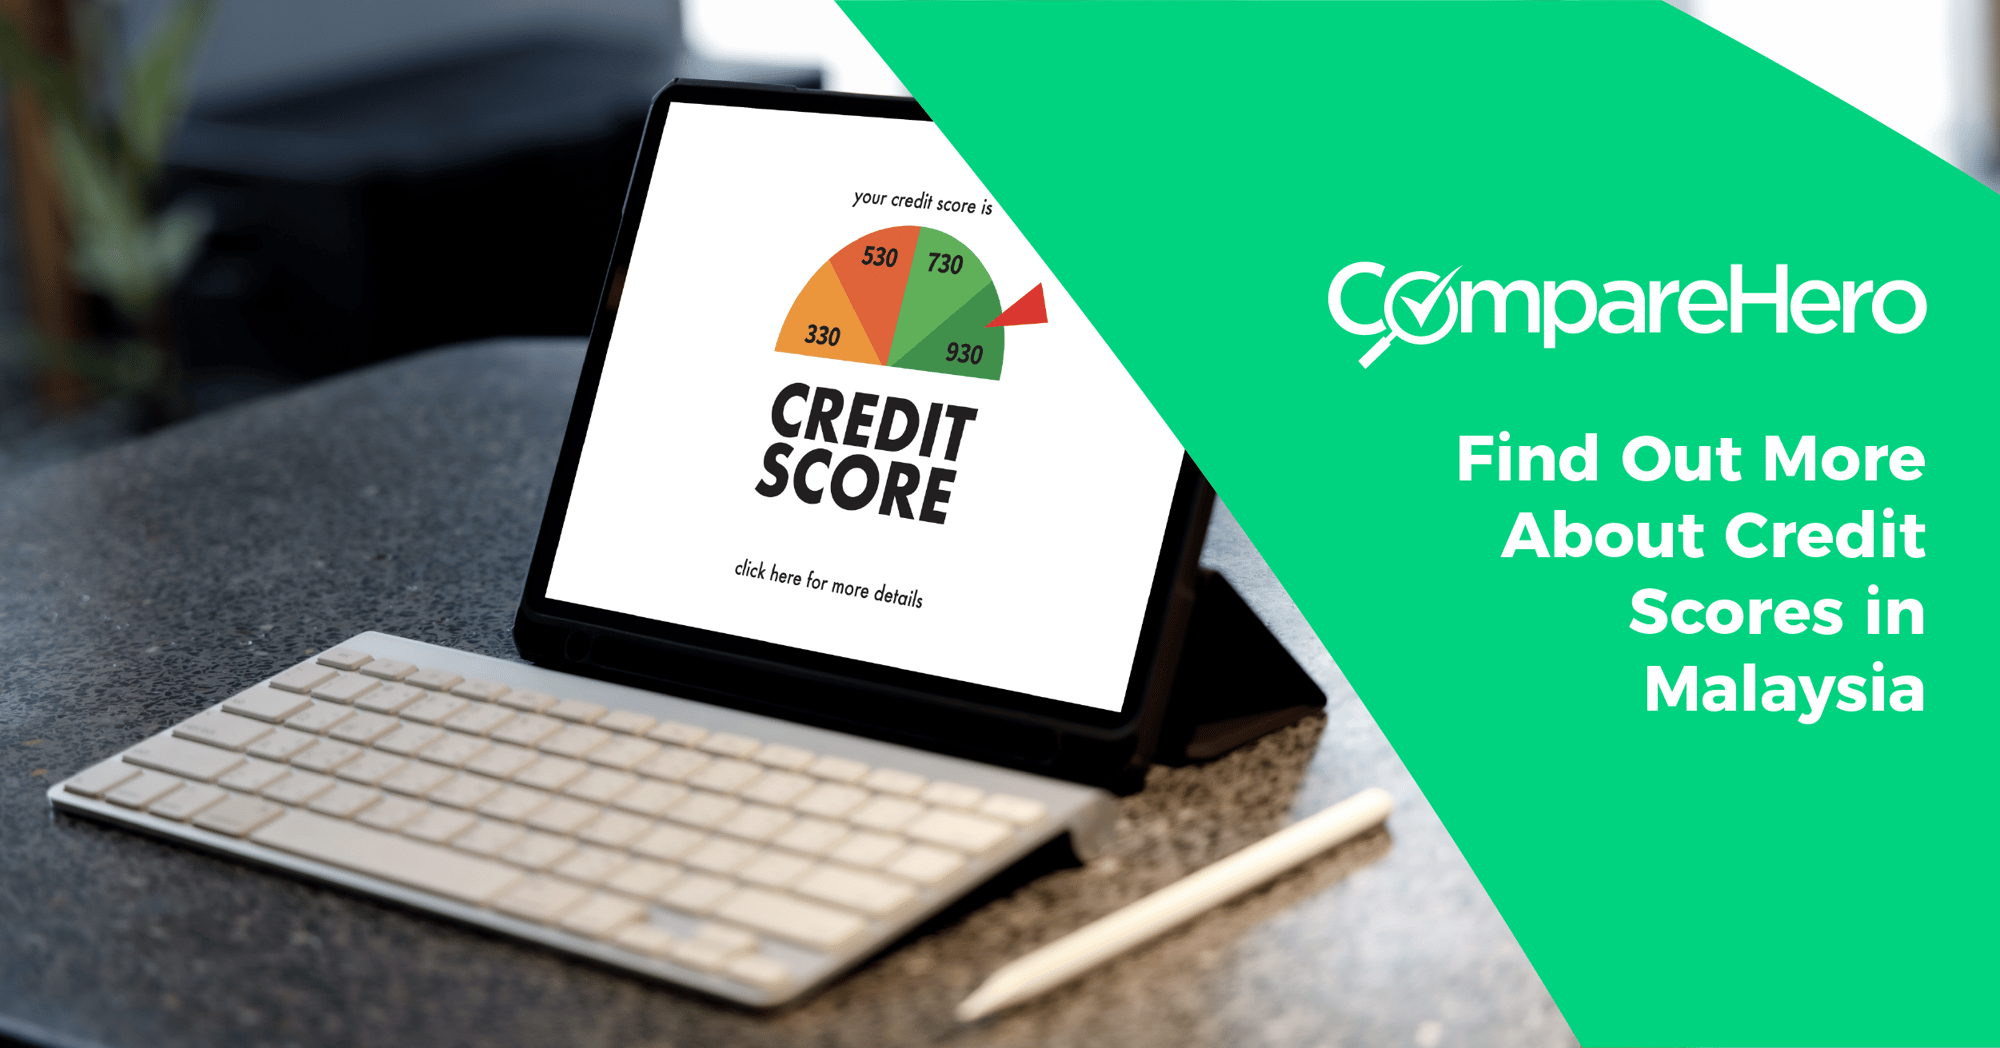 FI_Find_Out_More_About__Credit_Scores_in_Malaysia-01